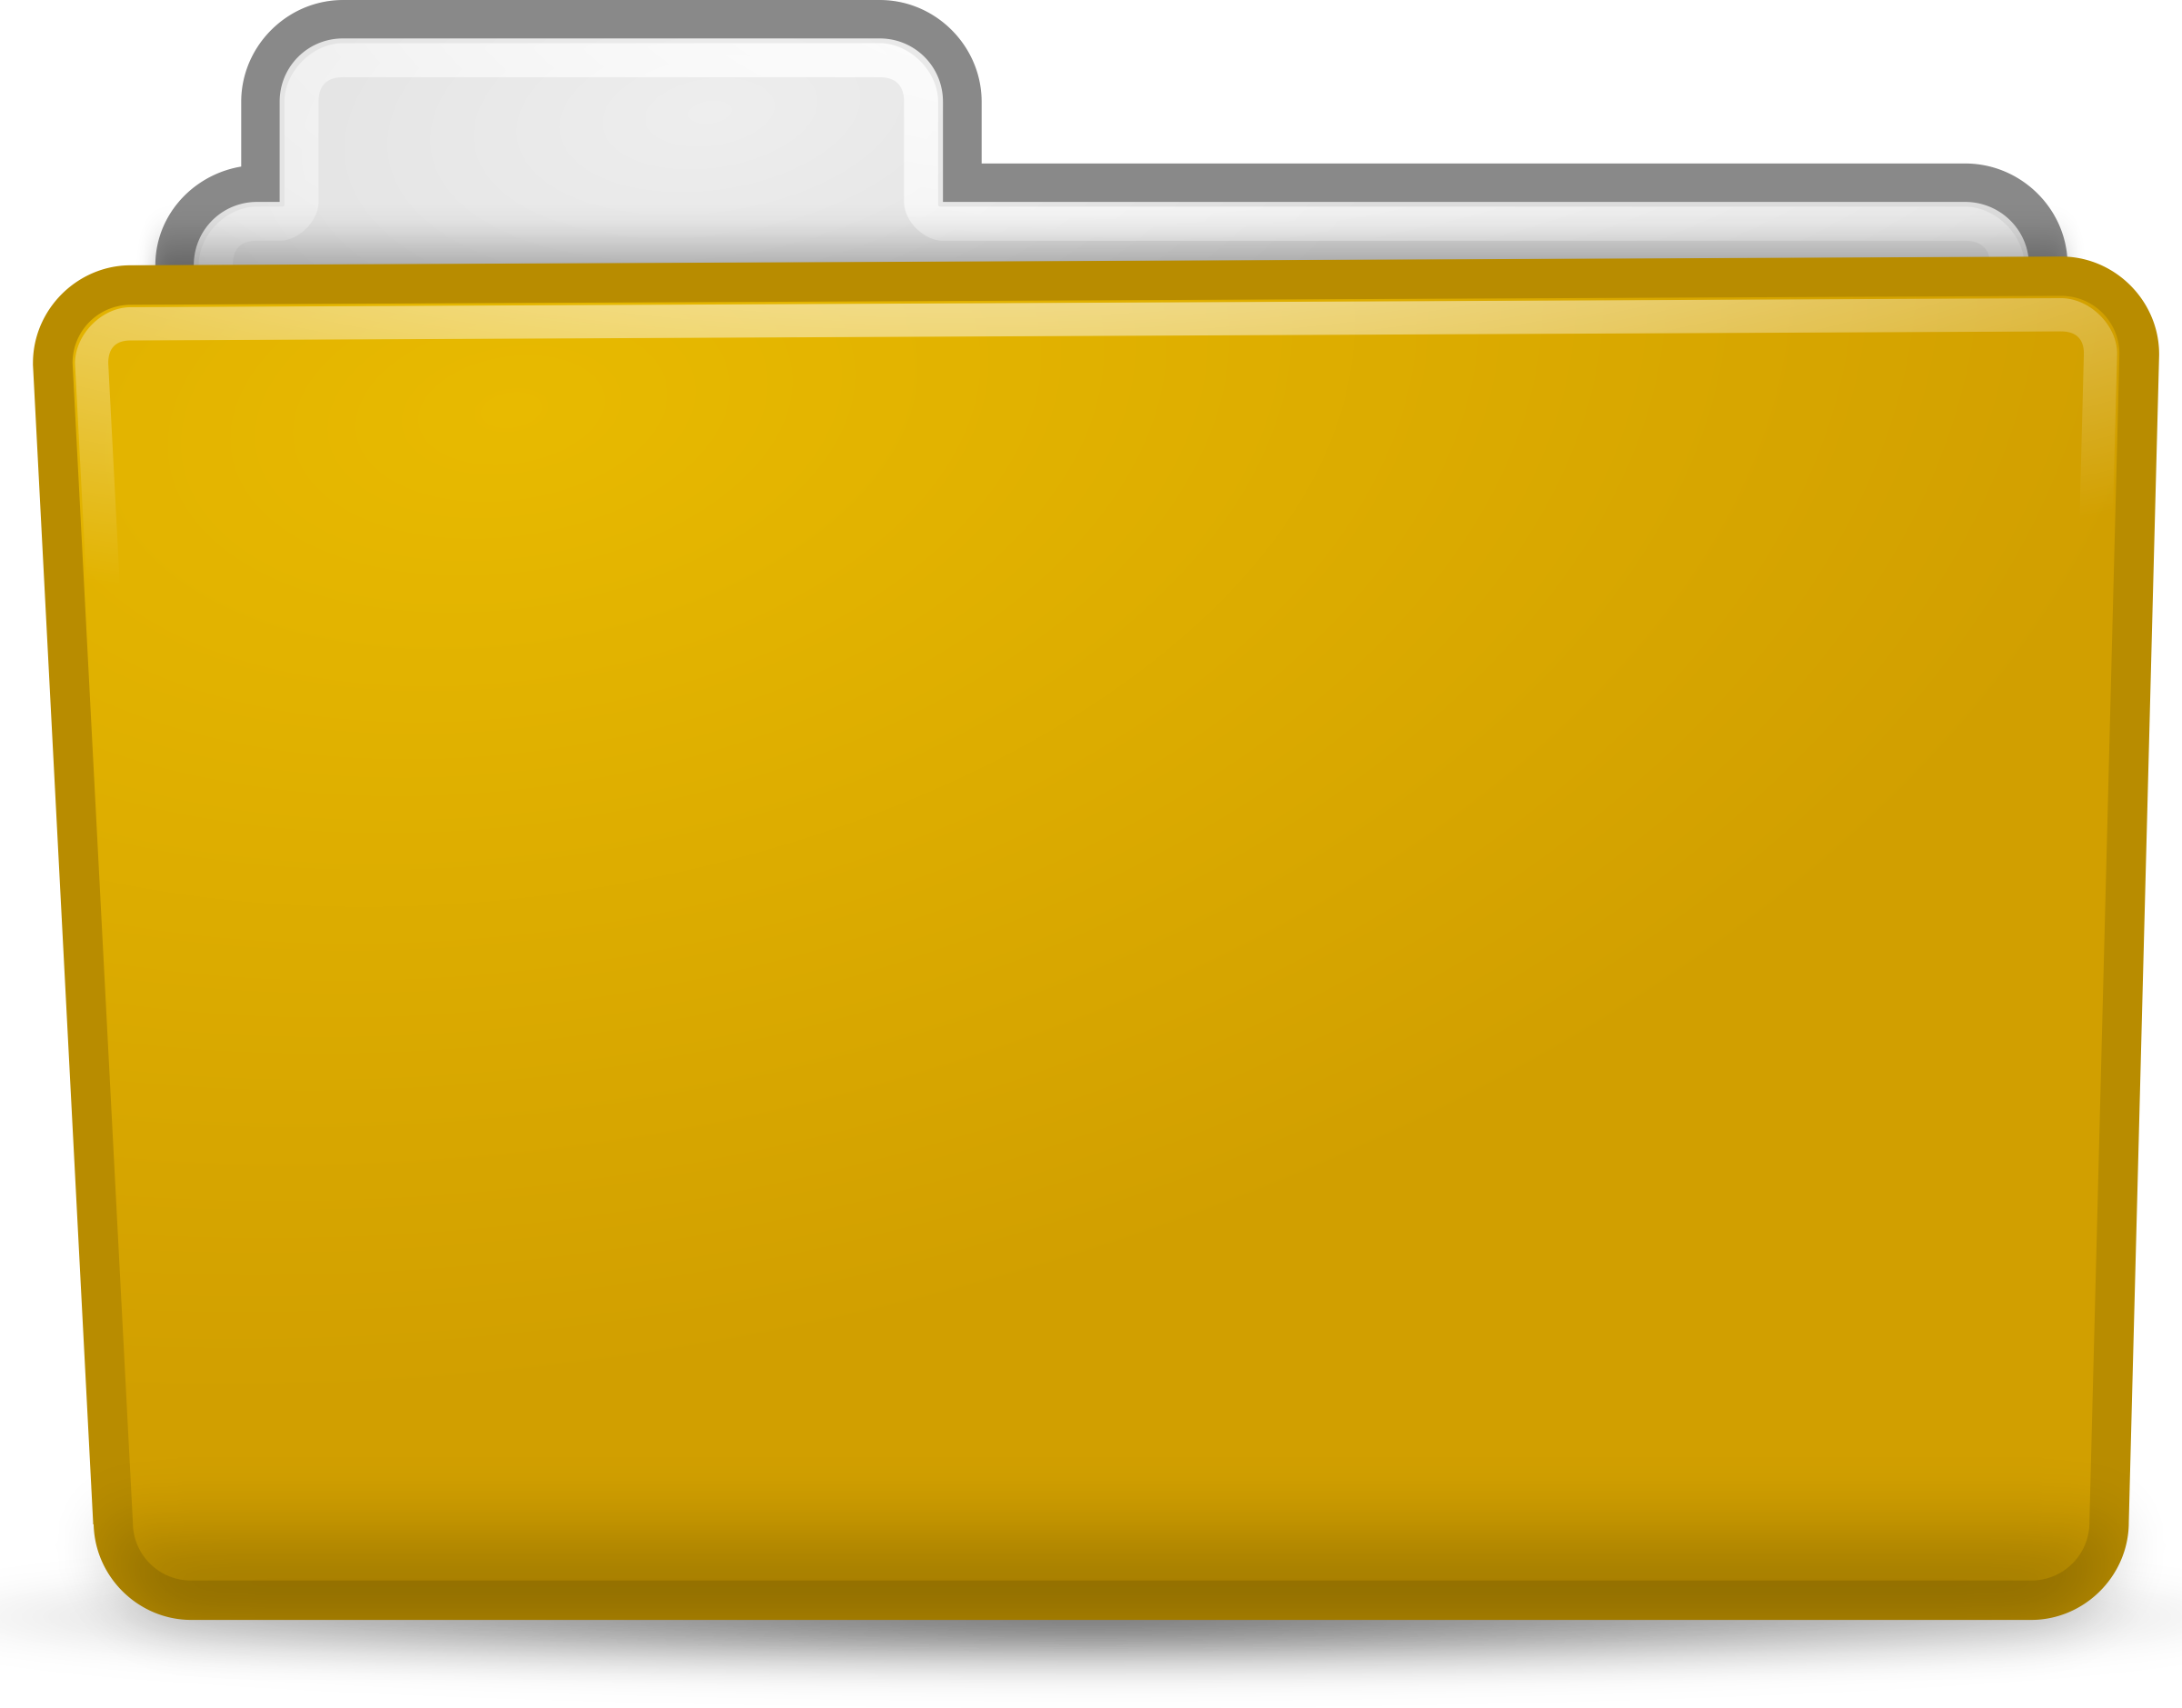 Folder clipart folder icon. Yellow icons png free